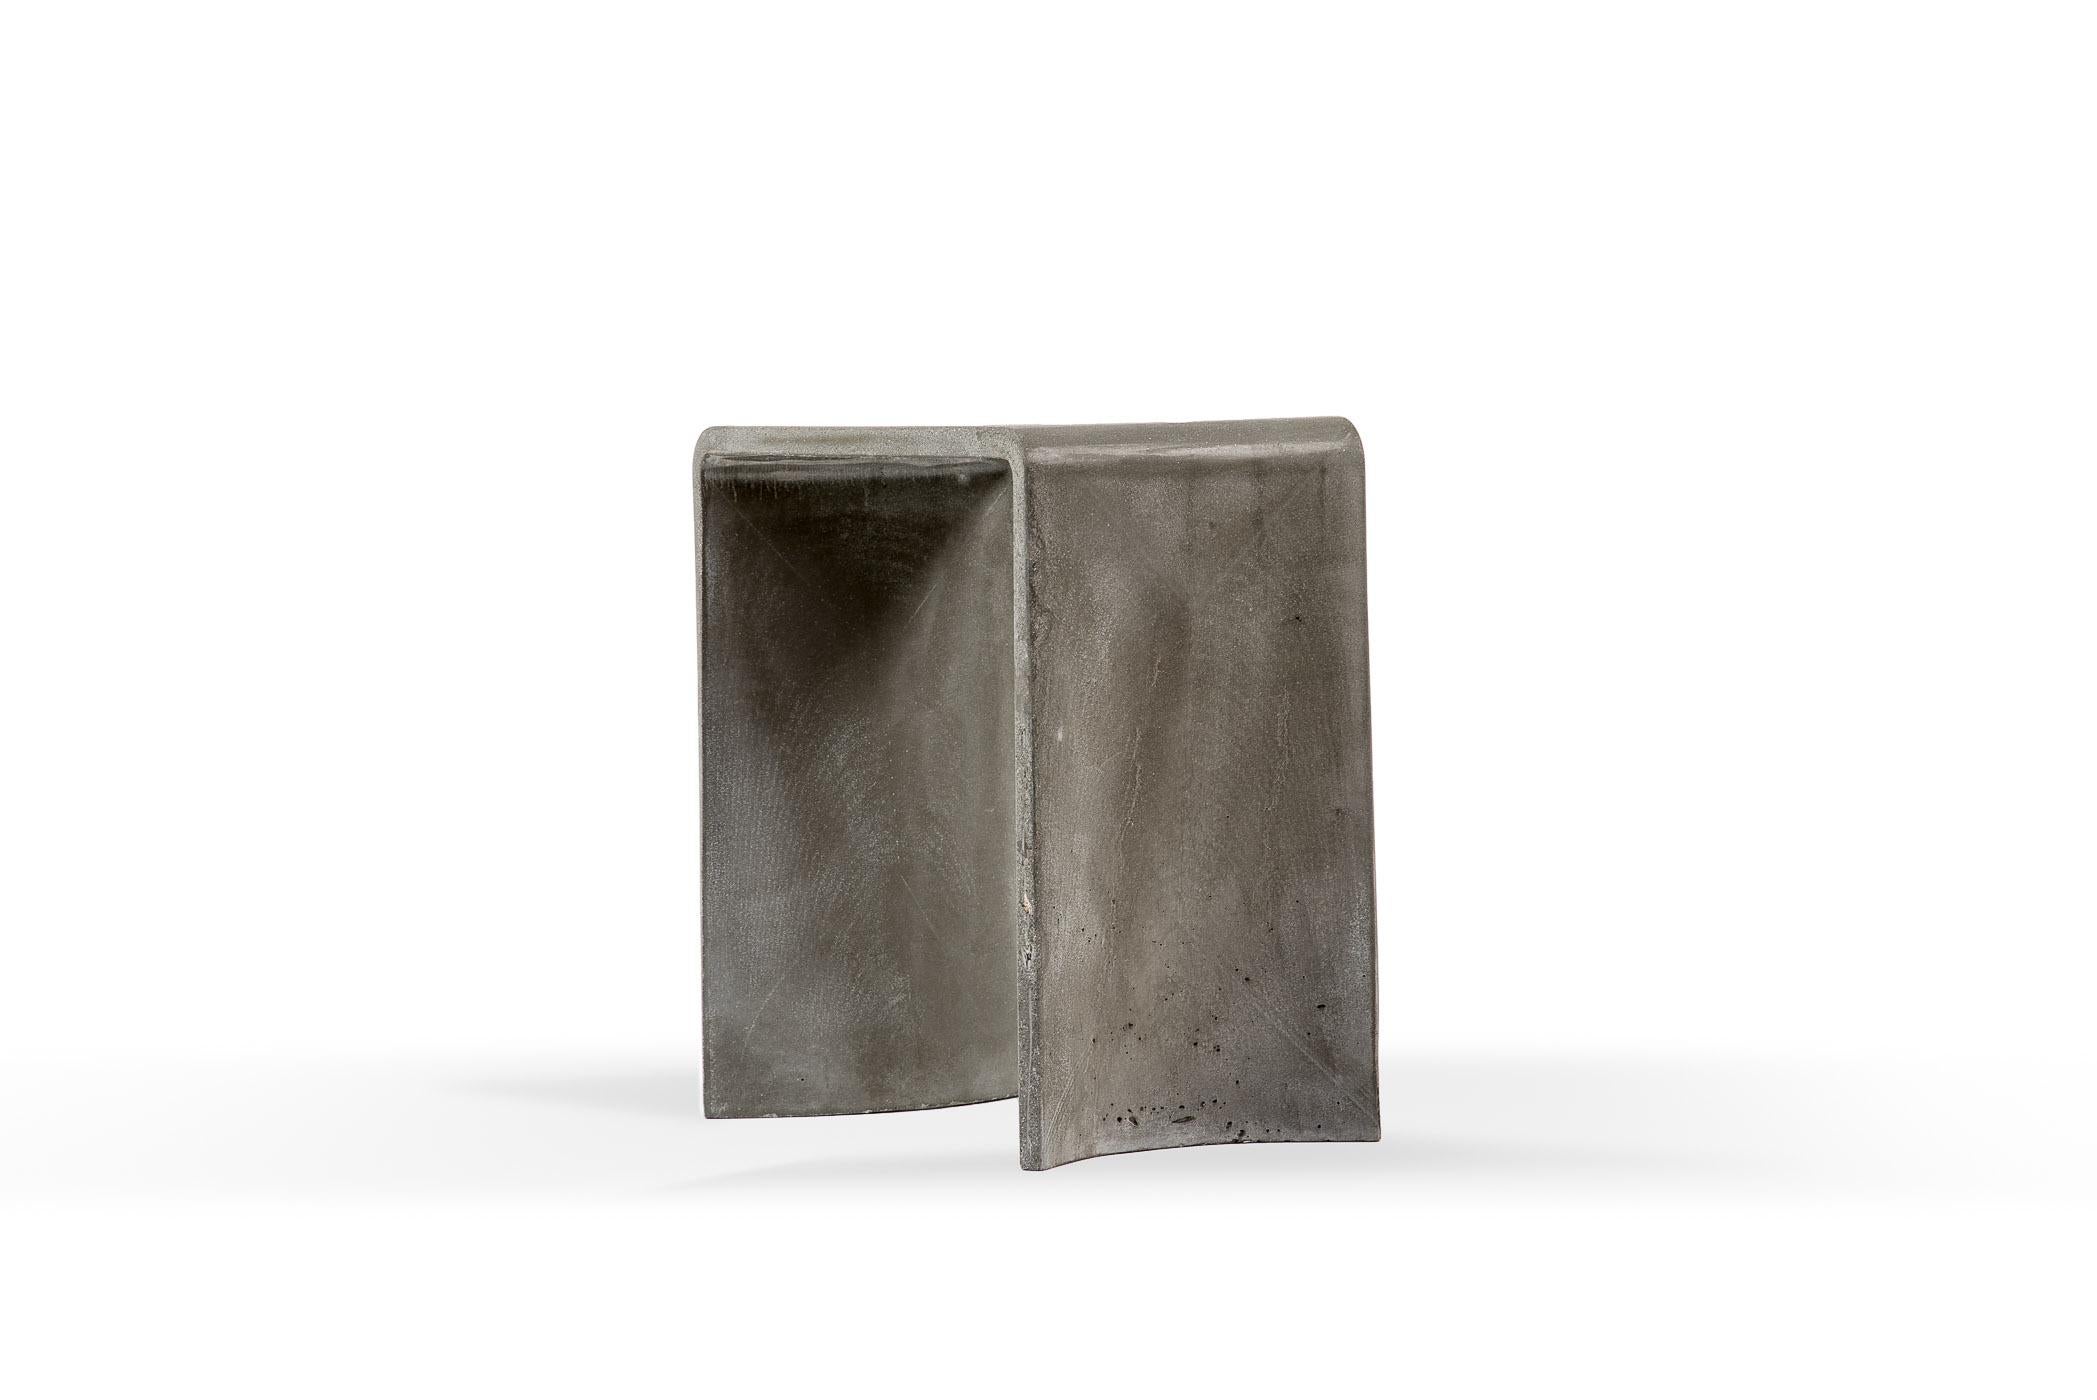 Molded 21st Century Concrete Contemporary Stool & Side Table, Red Brick Cement Color For Sale